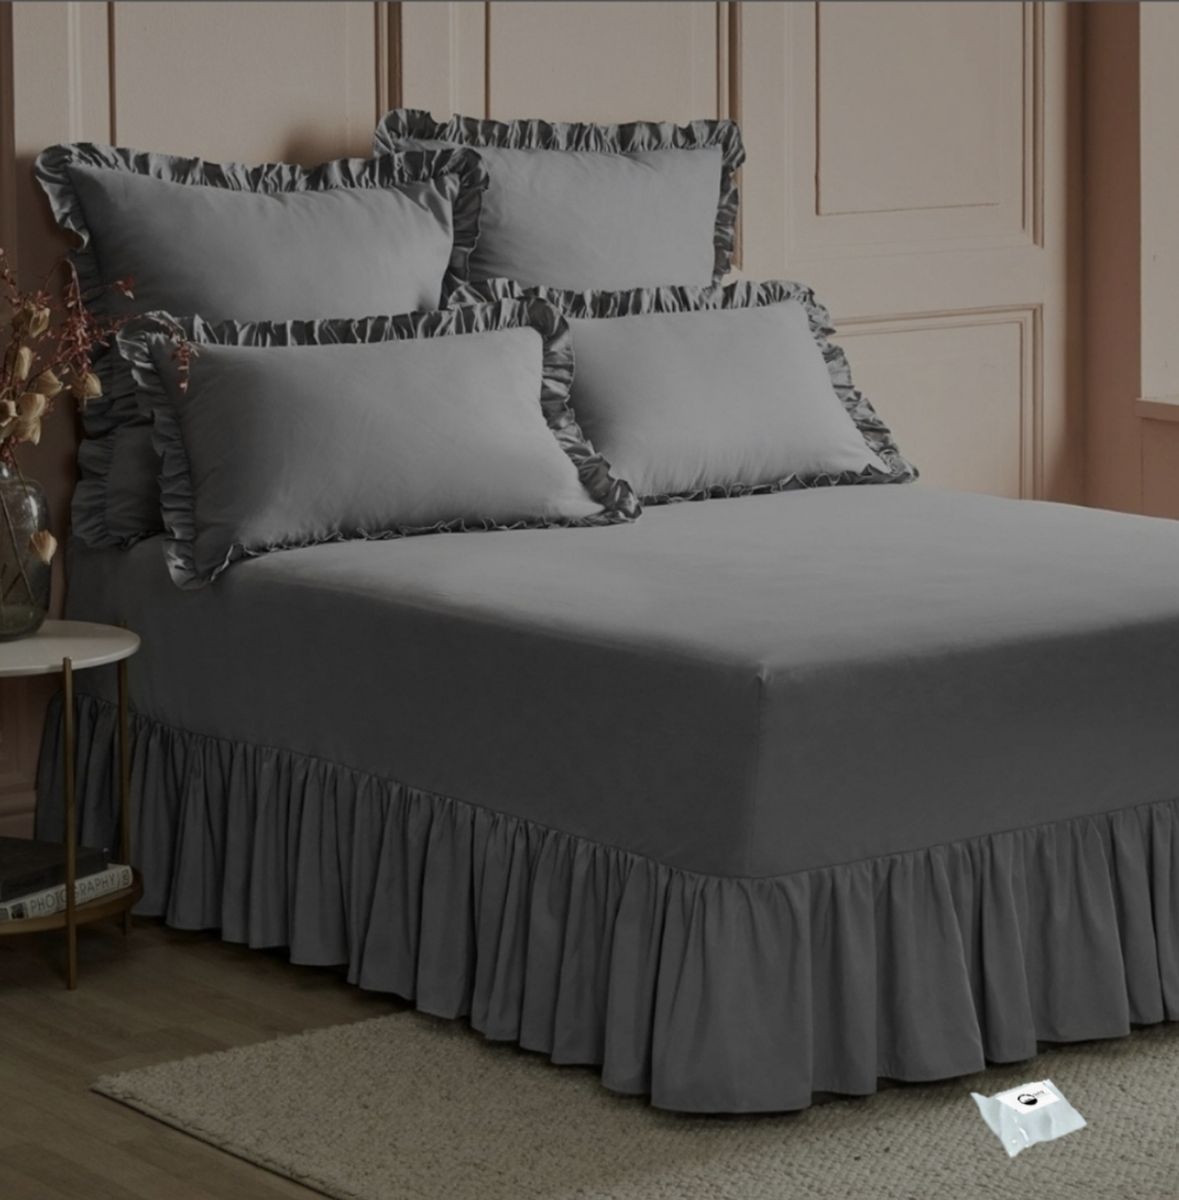 Smte 6 Piece Frilled Bed Sheet Set Shop Today Get It Tomorrow 2605